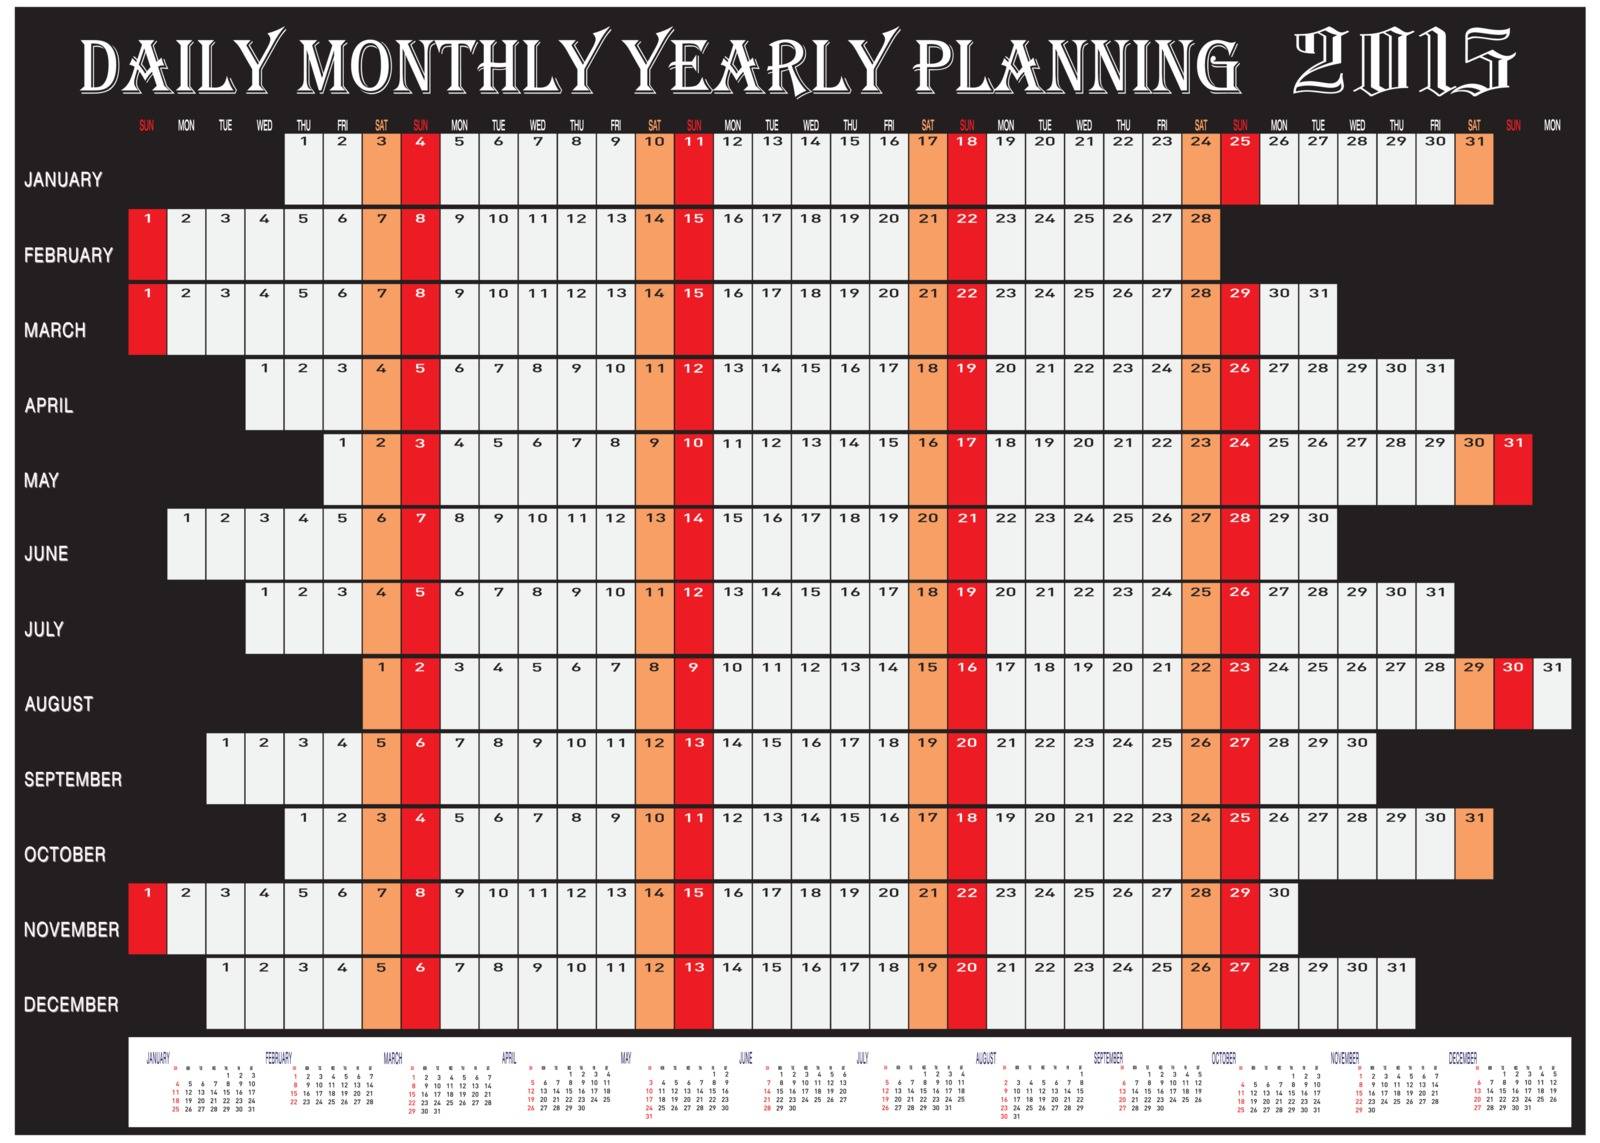 Daily Monthly Yearly Planning Chart 2015 by kobfujar